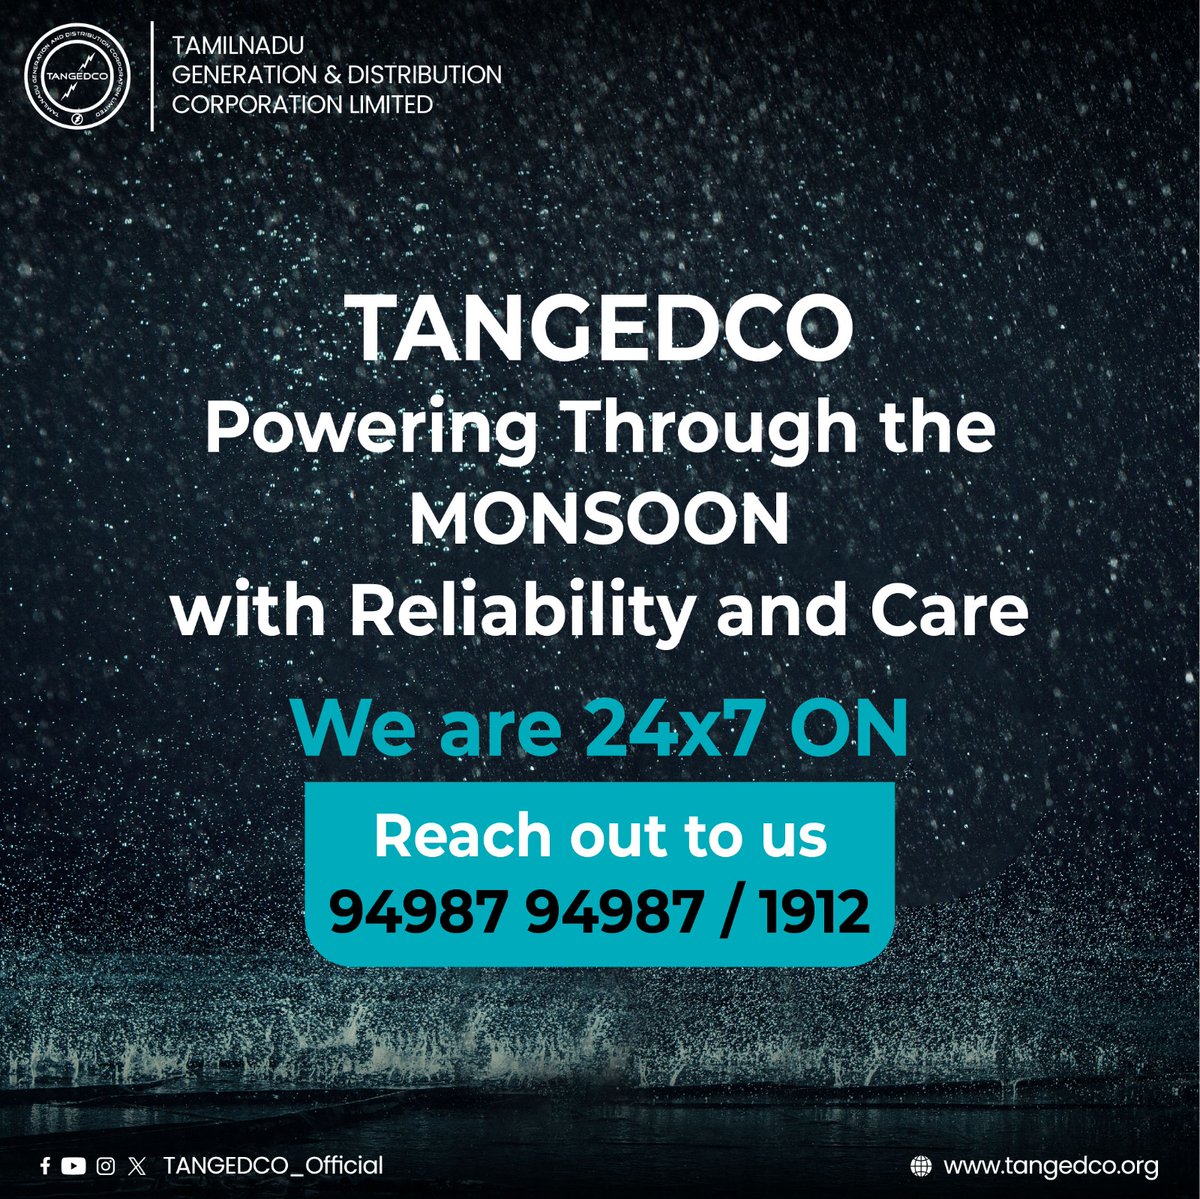 We're ready for the monsoon! TANGEDCO has taken all necessary precautions to ensure a reliable power supply during the rainy season. Stay safe and dry, and reach out to us at 94987 94987 (or) 1912 if you need any assistance. 

Call: +91 94987  94987 

#MonsoonReady #chennairains